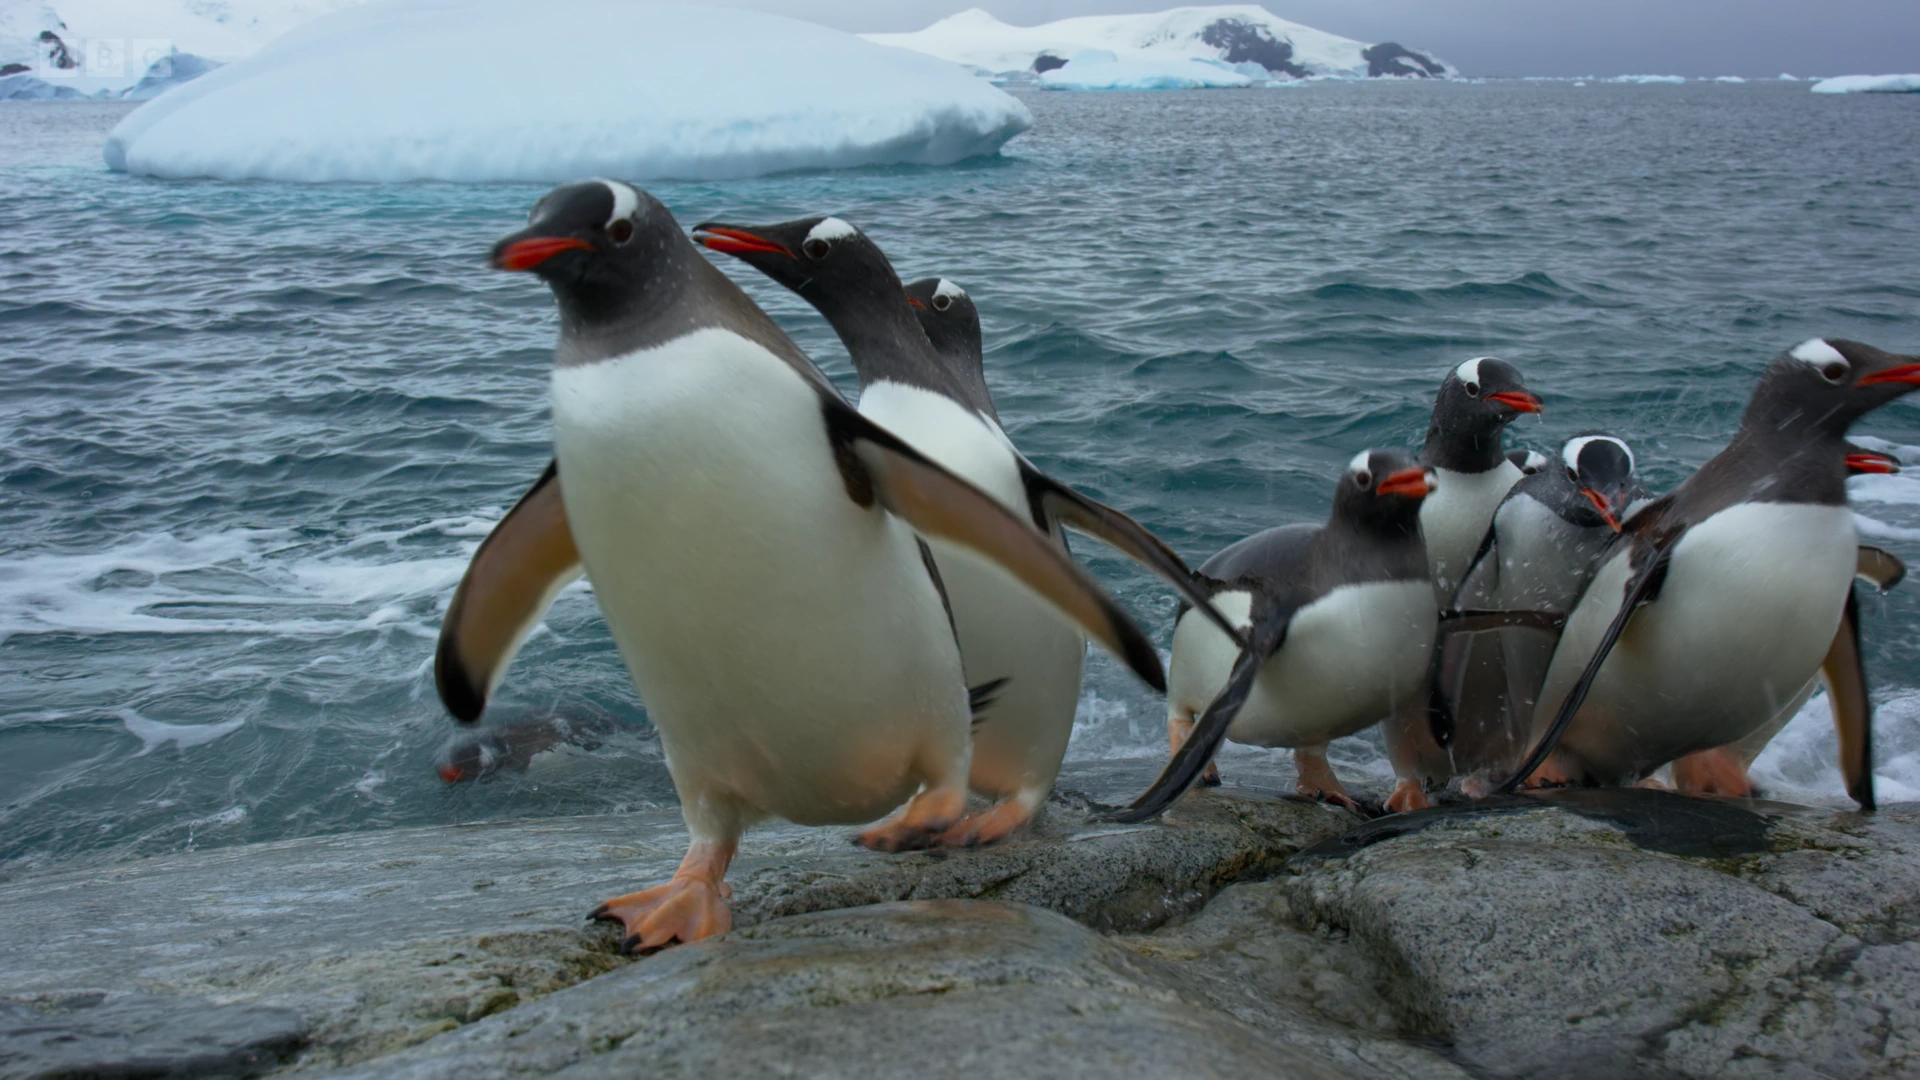 Gentoo penguin (Pygoscelis papua) as shown in Seven Worlds, One Planet - Antarctica